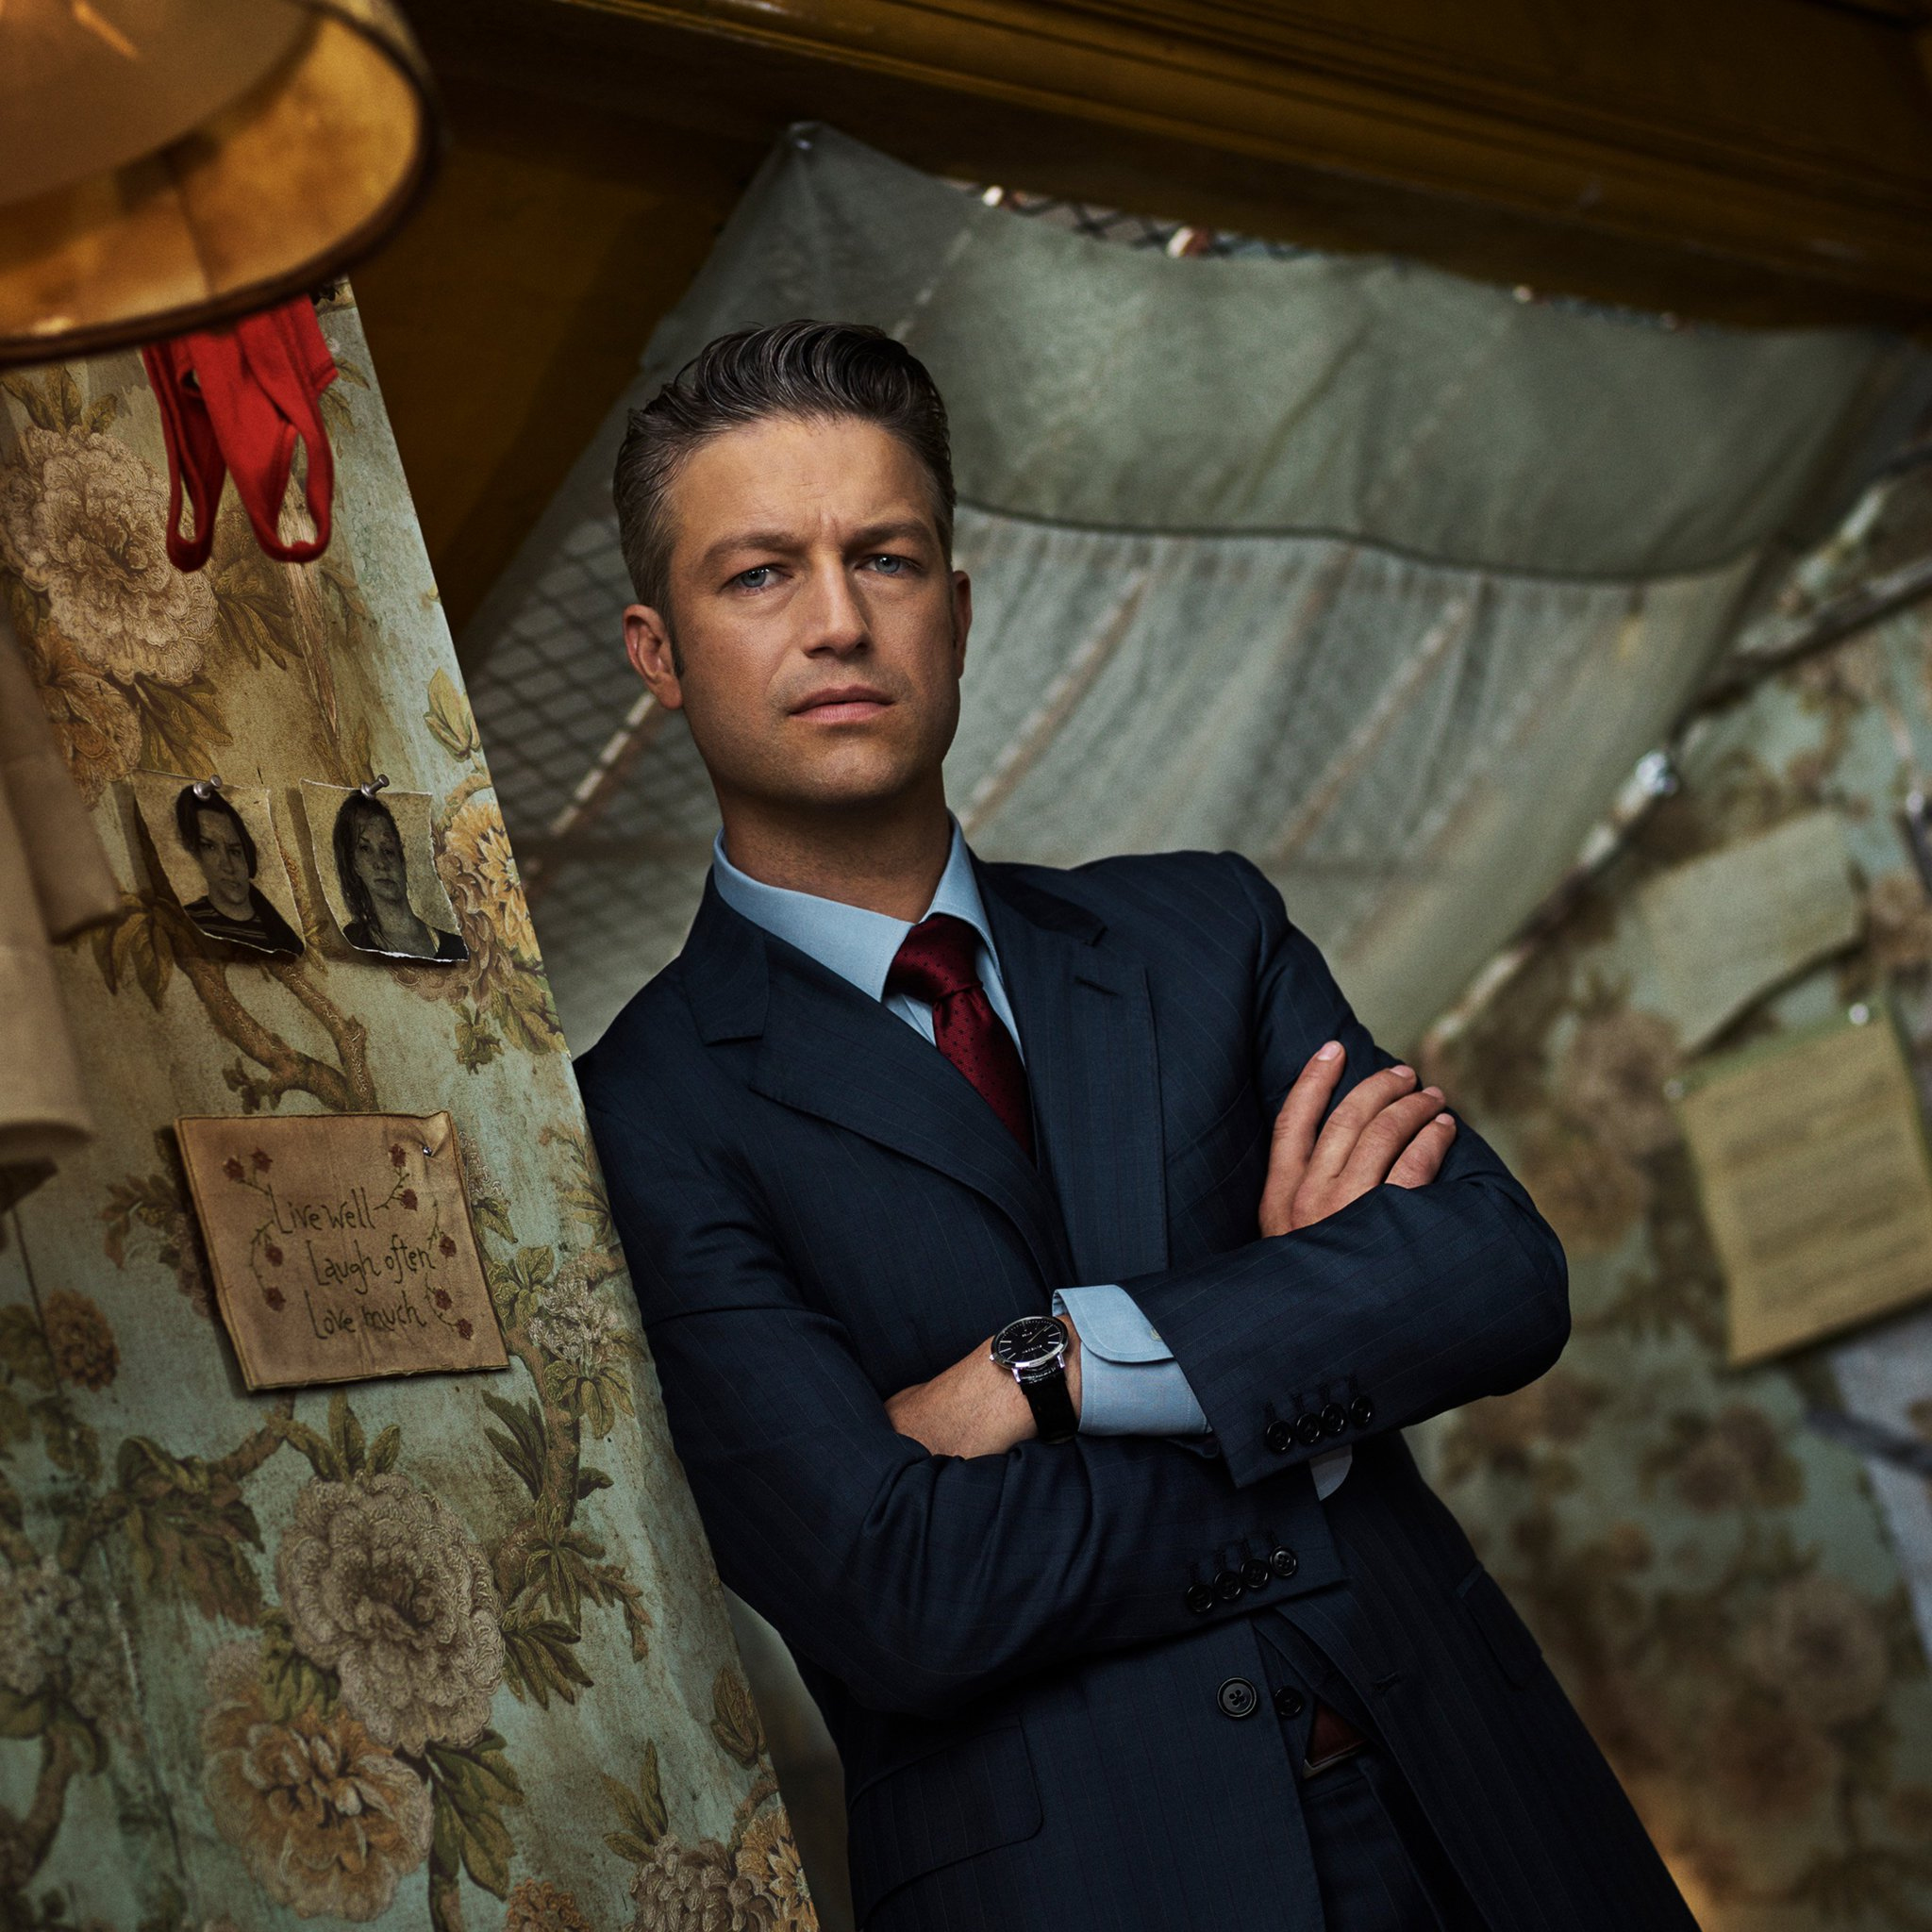 Photo of Law and Order: SVU - Season 21 Portrait - Peter Scanavino as Sonny...